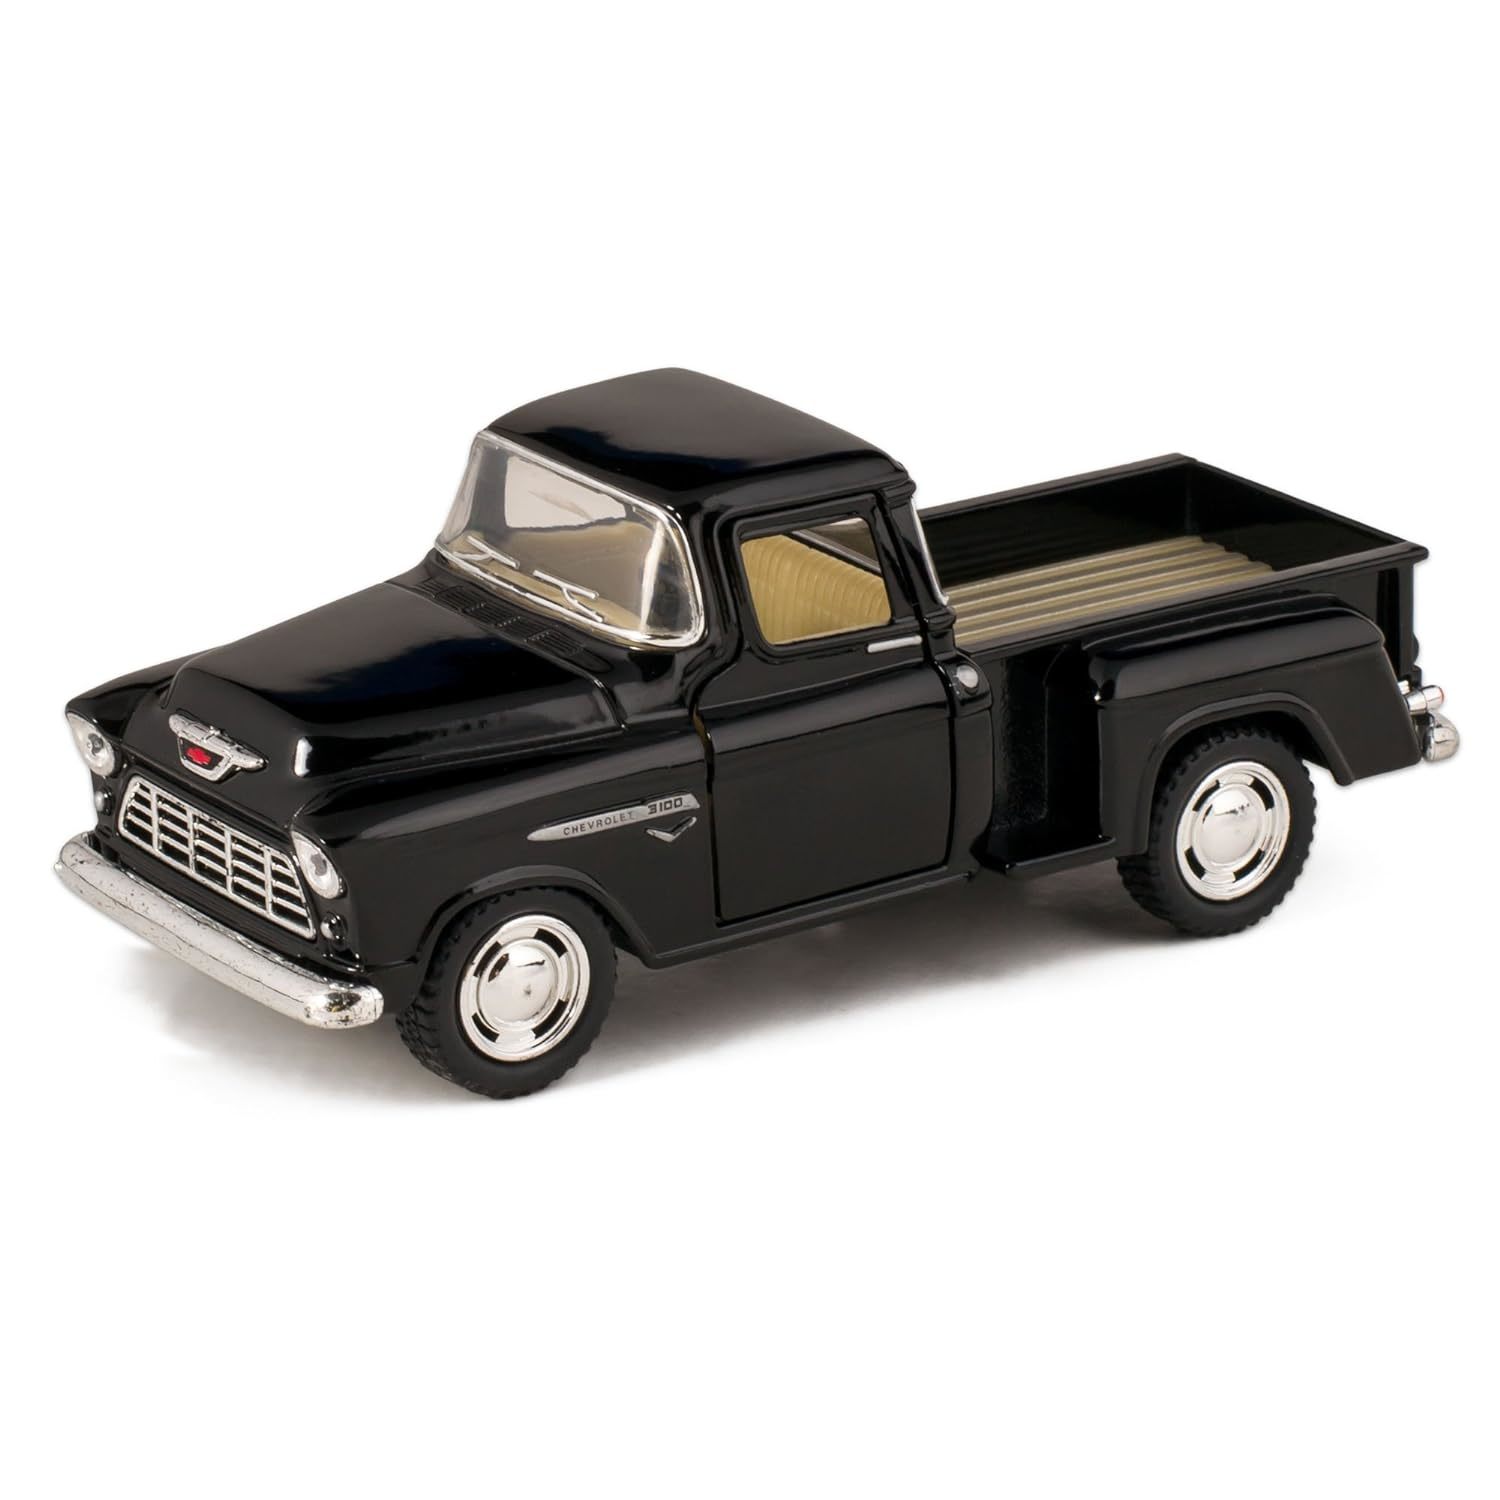 Primary image for Black 1955 Chevy Stepside Pick-Up Die Cast Collectible Toy Truck by Kinsmart